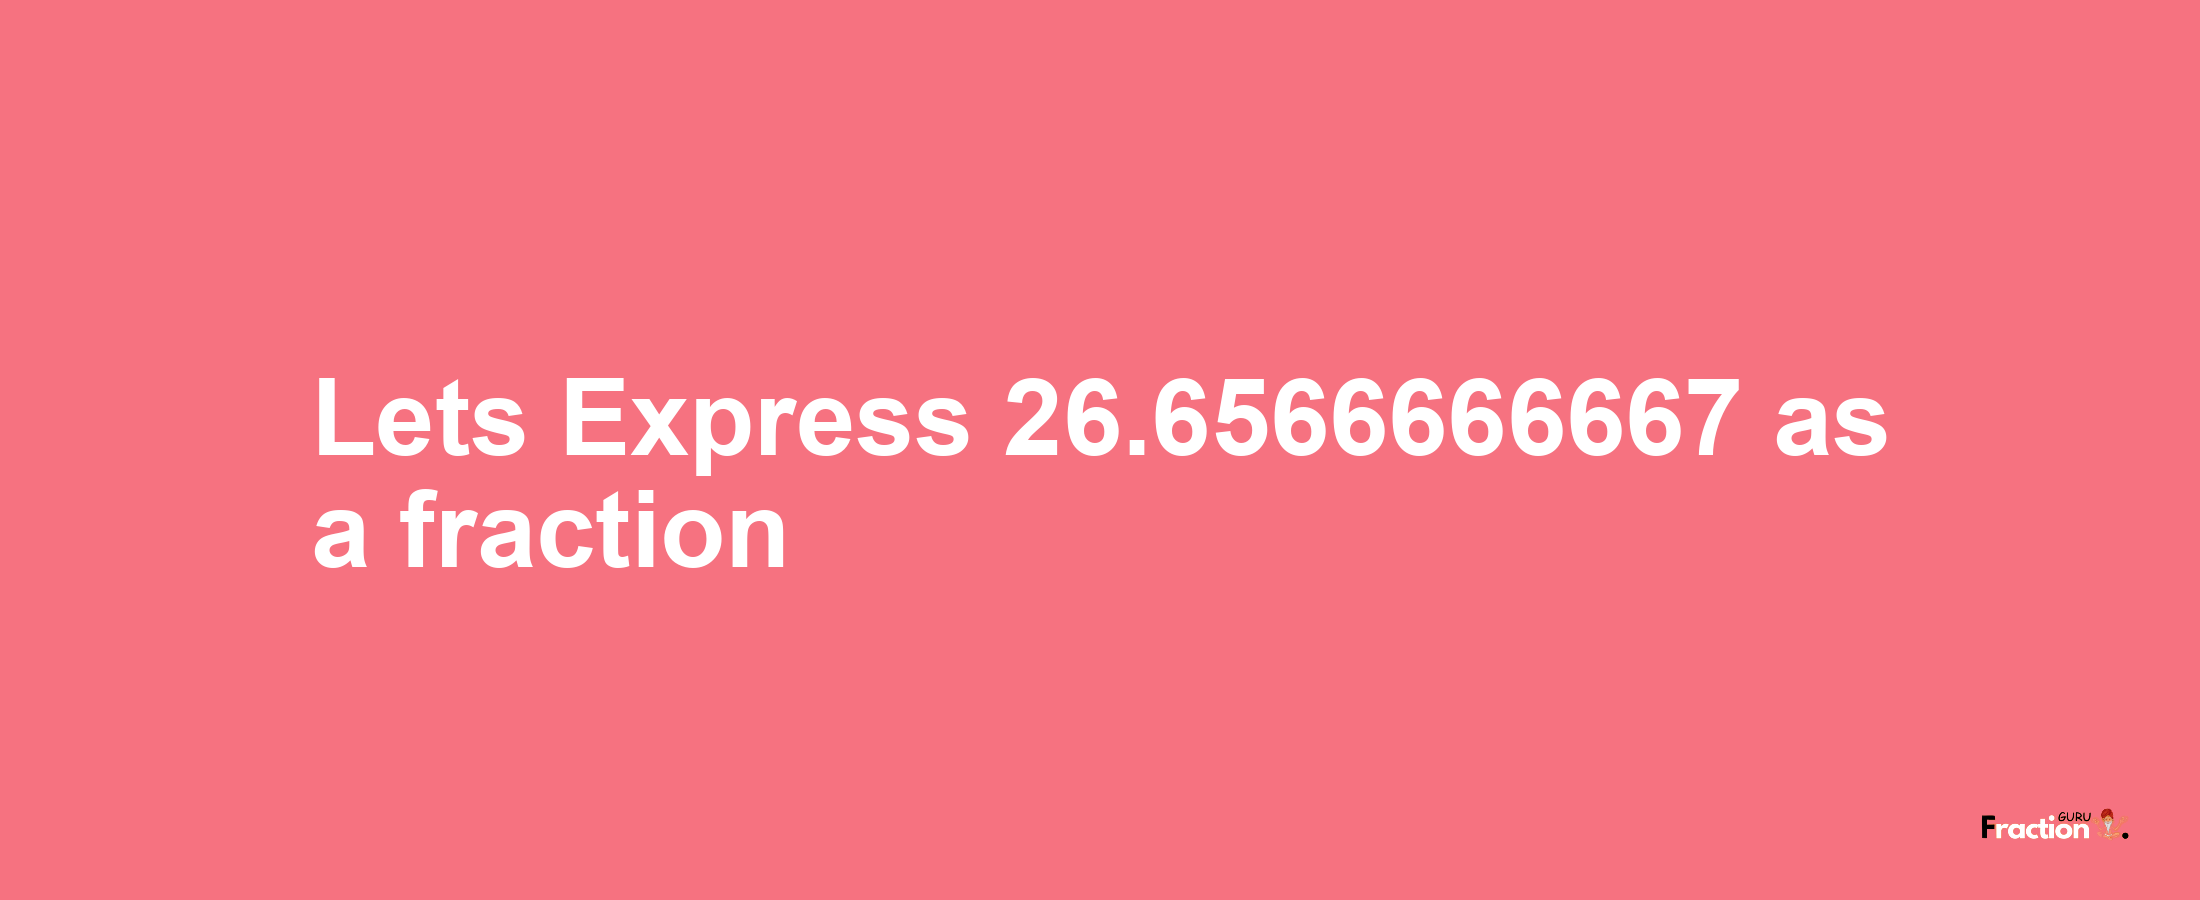 Lets Express 26.6566666667 as afraction